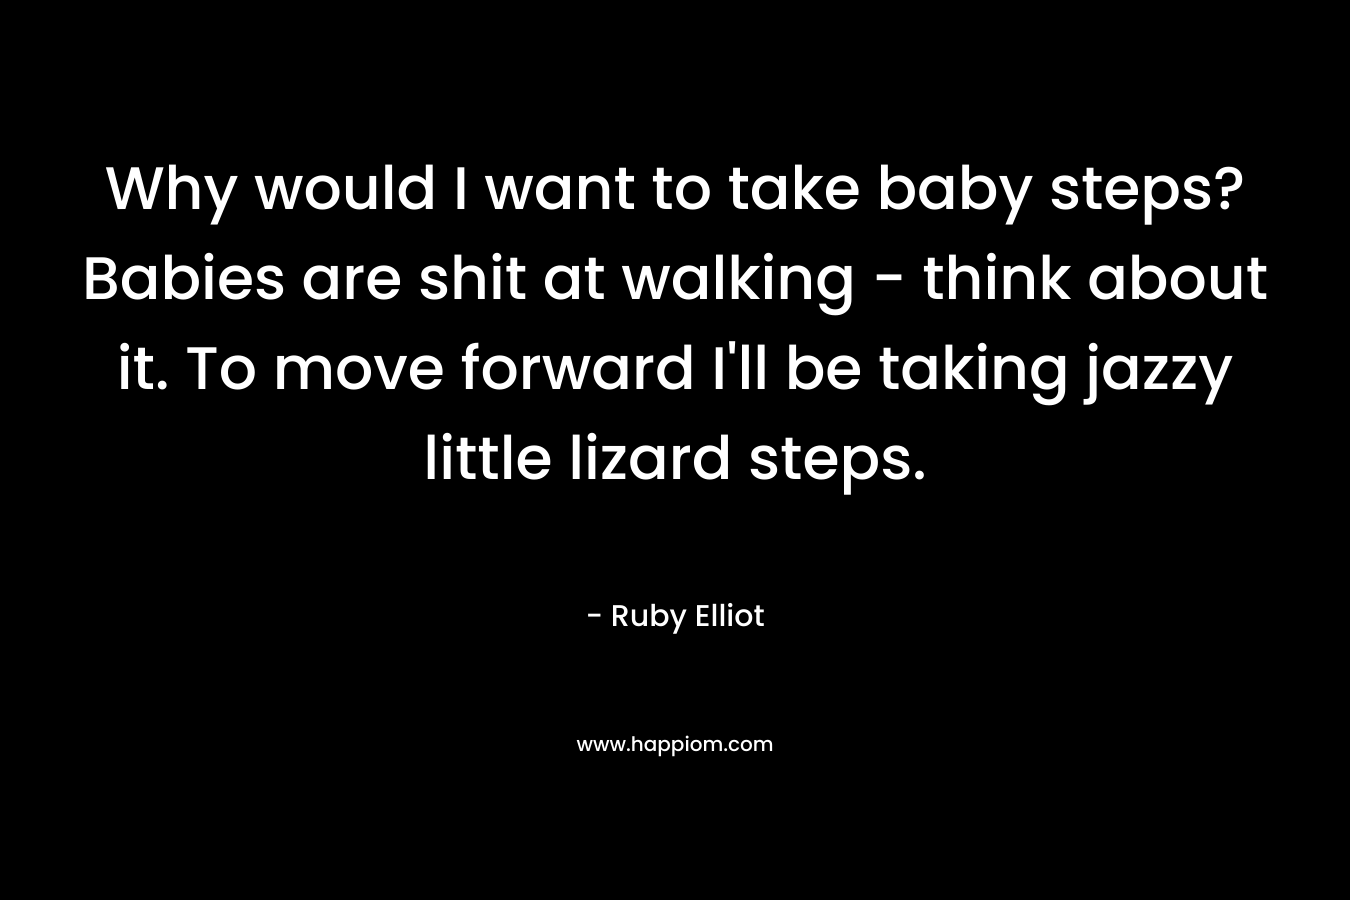 Why would I want to take baby steps? Babies are shit at walking – think about it. To move forward I’ll be taking jazzy little lizard steps. – Ruby Elliot